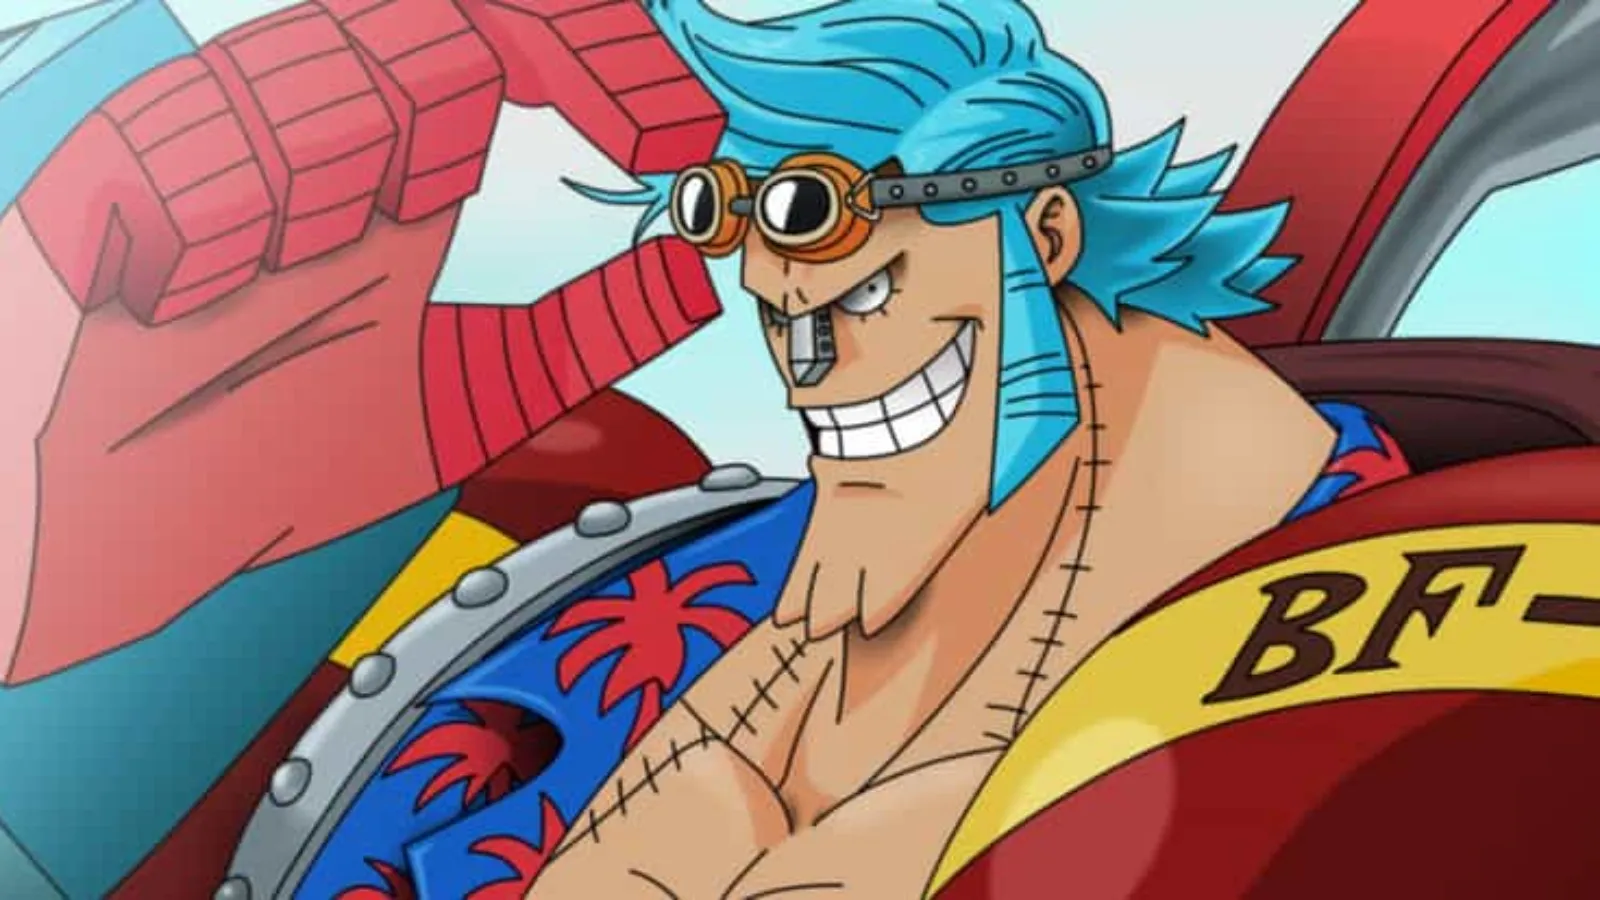 Franky from One Piece